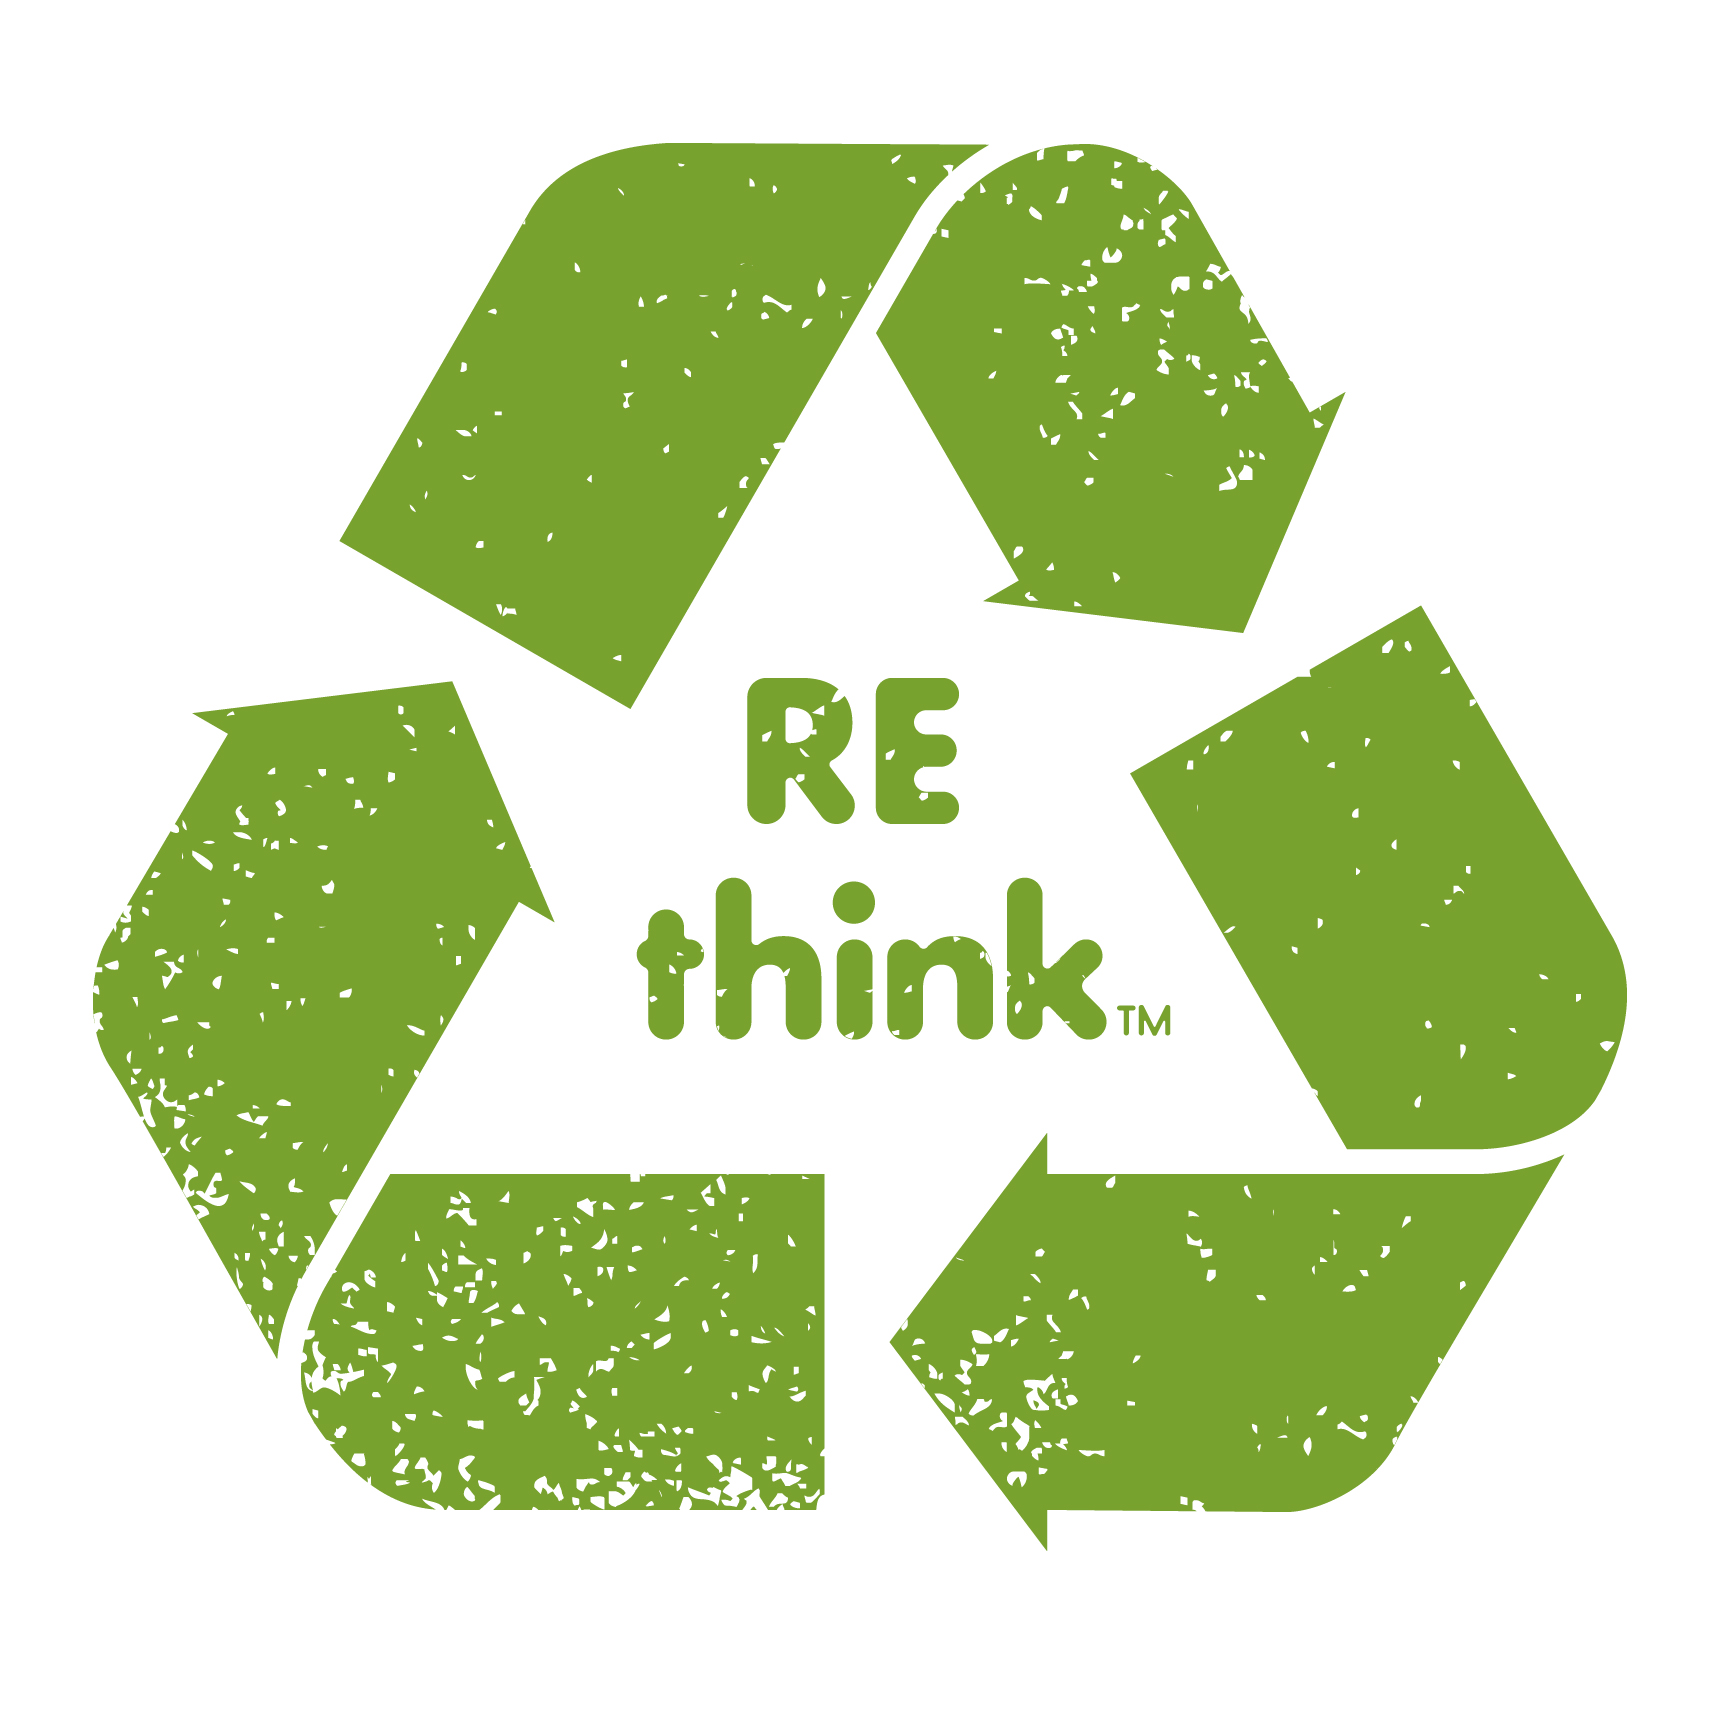 Home reduce. Reduce reuse recycle. Reduce экология. Знак reduce reuse recycle. Концепция reuse reduce recycle.